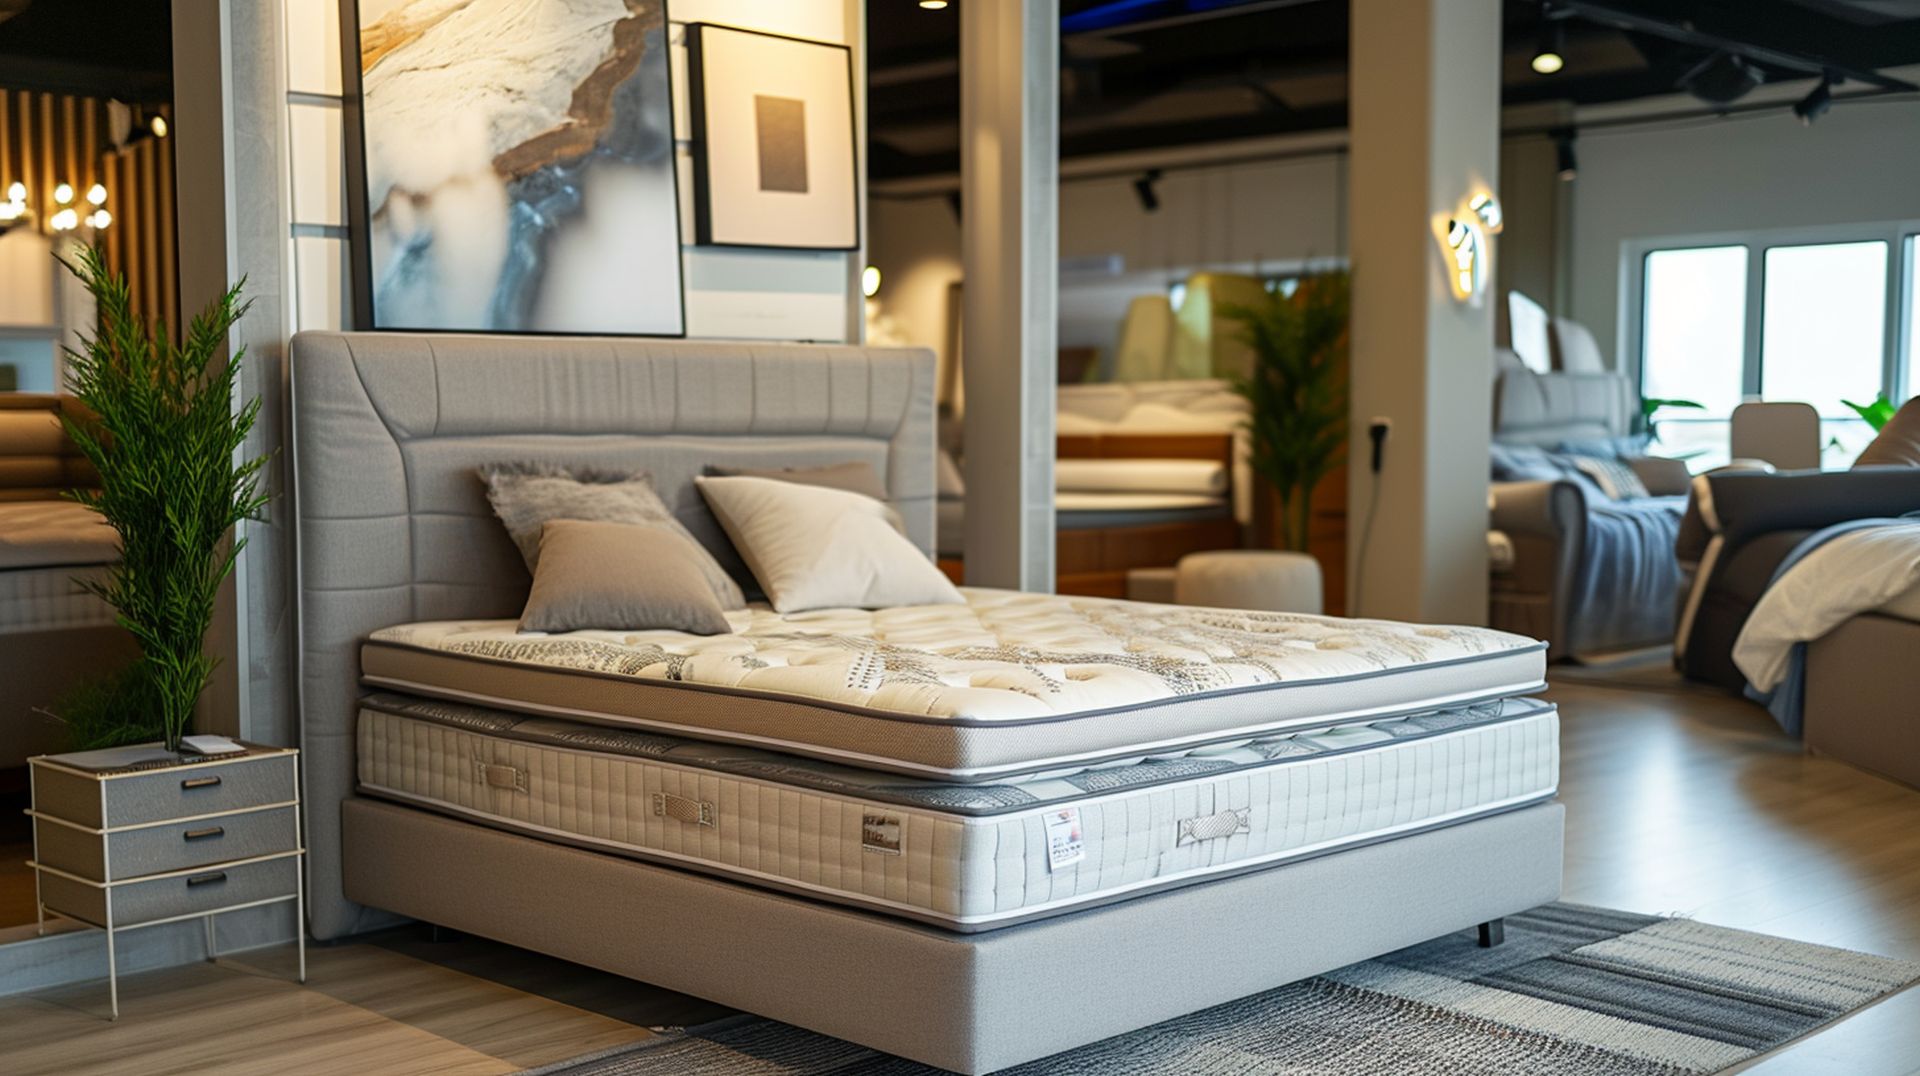 Local Fayetteville mattress stores have the best prices, sales, and deals if you're looking for a new mattress in Fayetteville